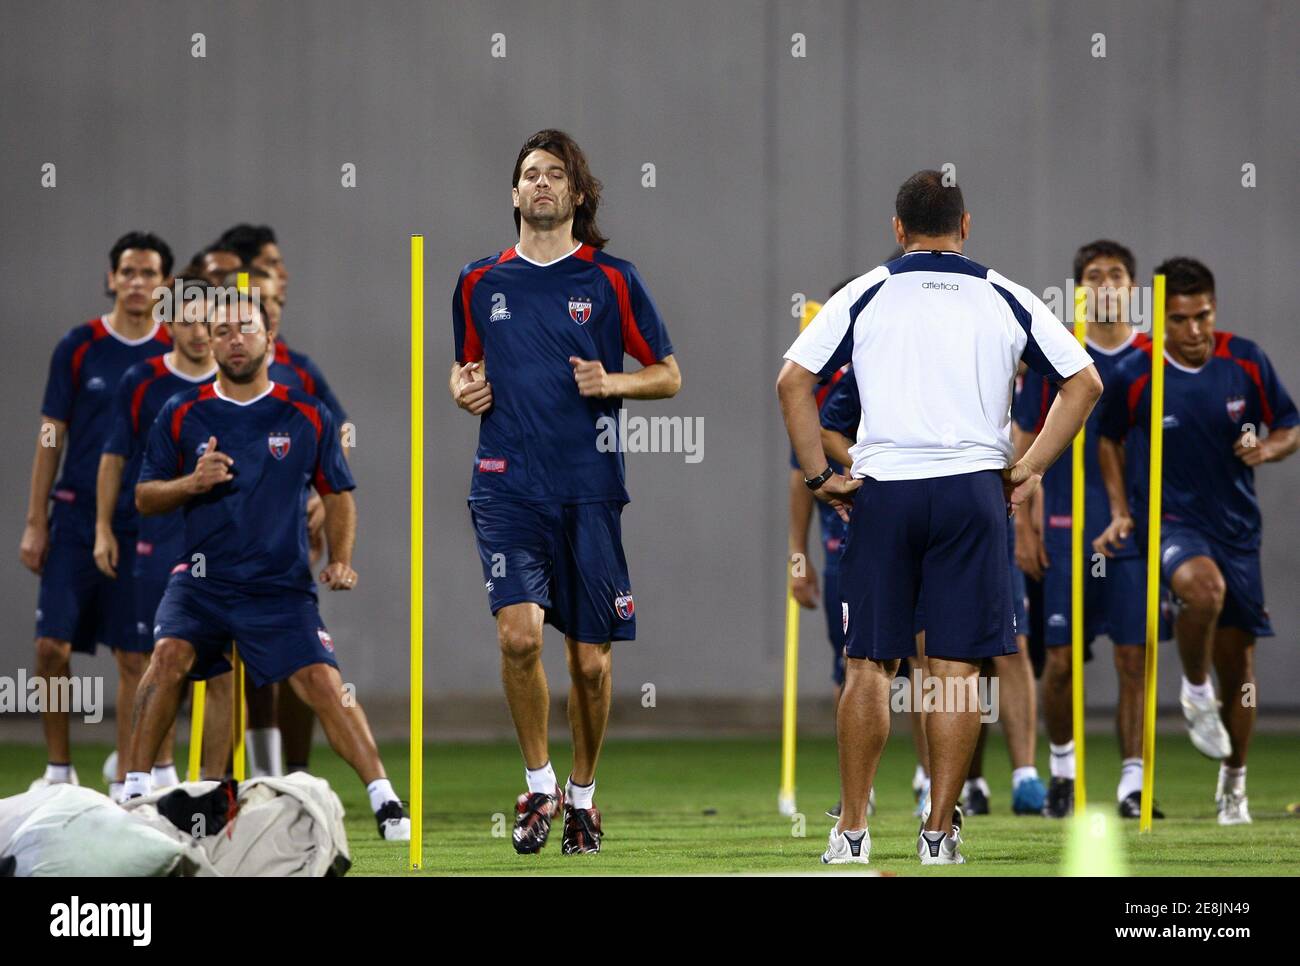 Members of the Atlante soccer team take part in a training session at Al Nahyan stadium in Abu Dhabi December 10, 2009. Mexico's Atlante will play Auckland City on Saturday during the FIFA Club World Cup soccer tournament in Abu Dhabi. REUTERS/Fahad Shadeed (UNITED ARAB EMIRATES SPORT SOCCER) Stock Photo